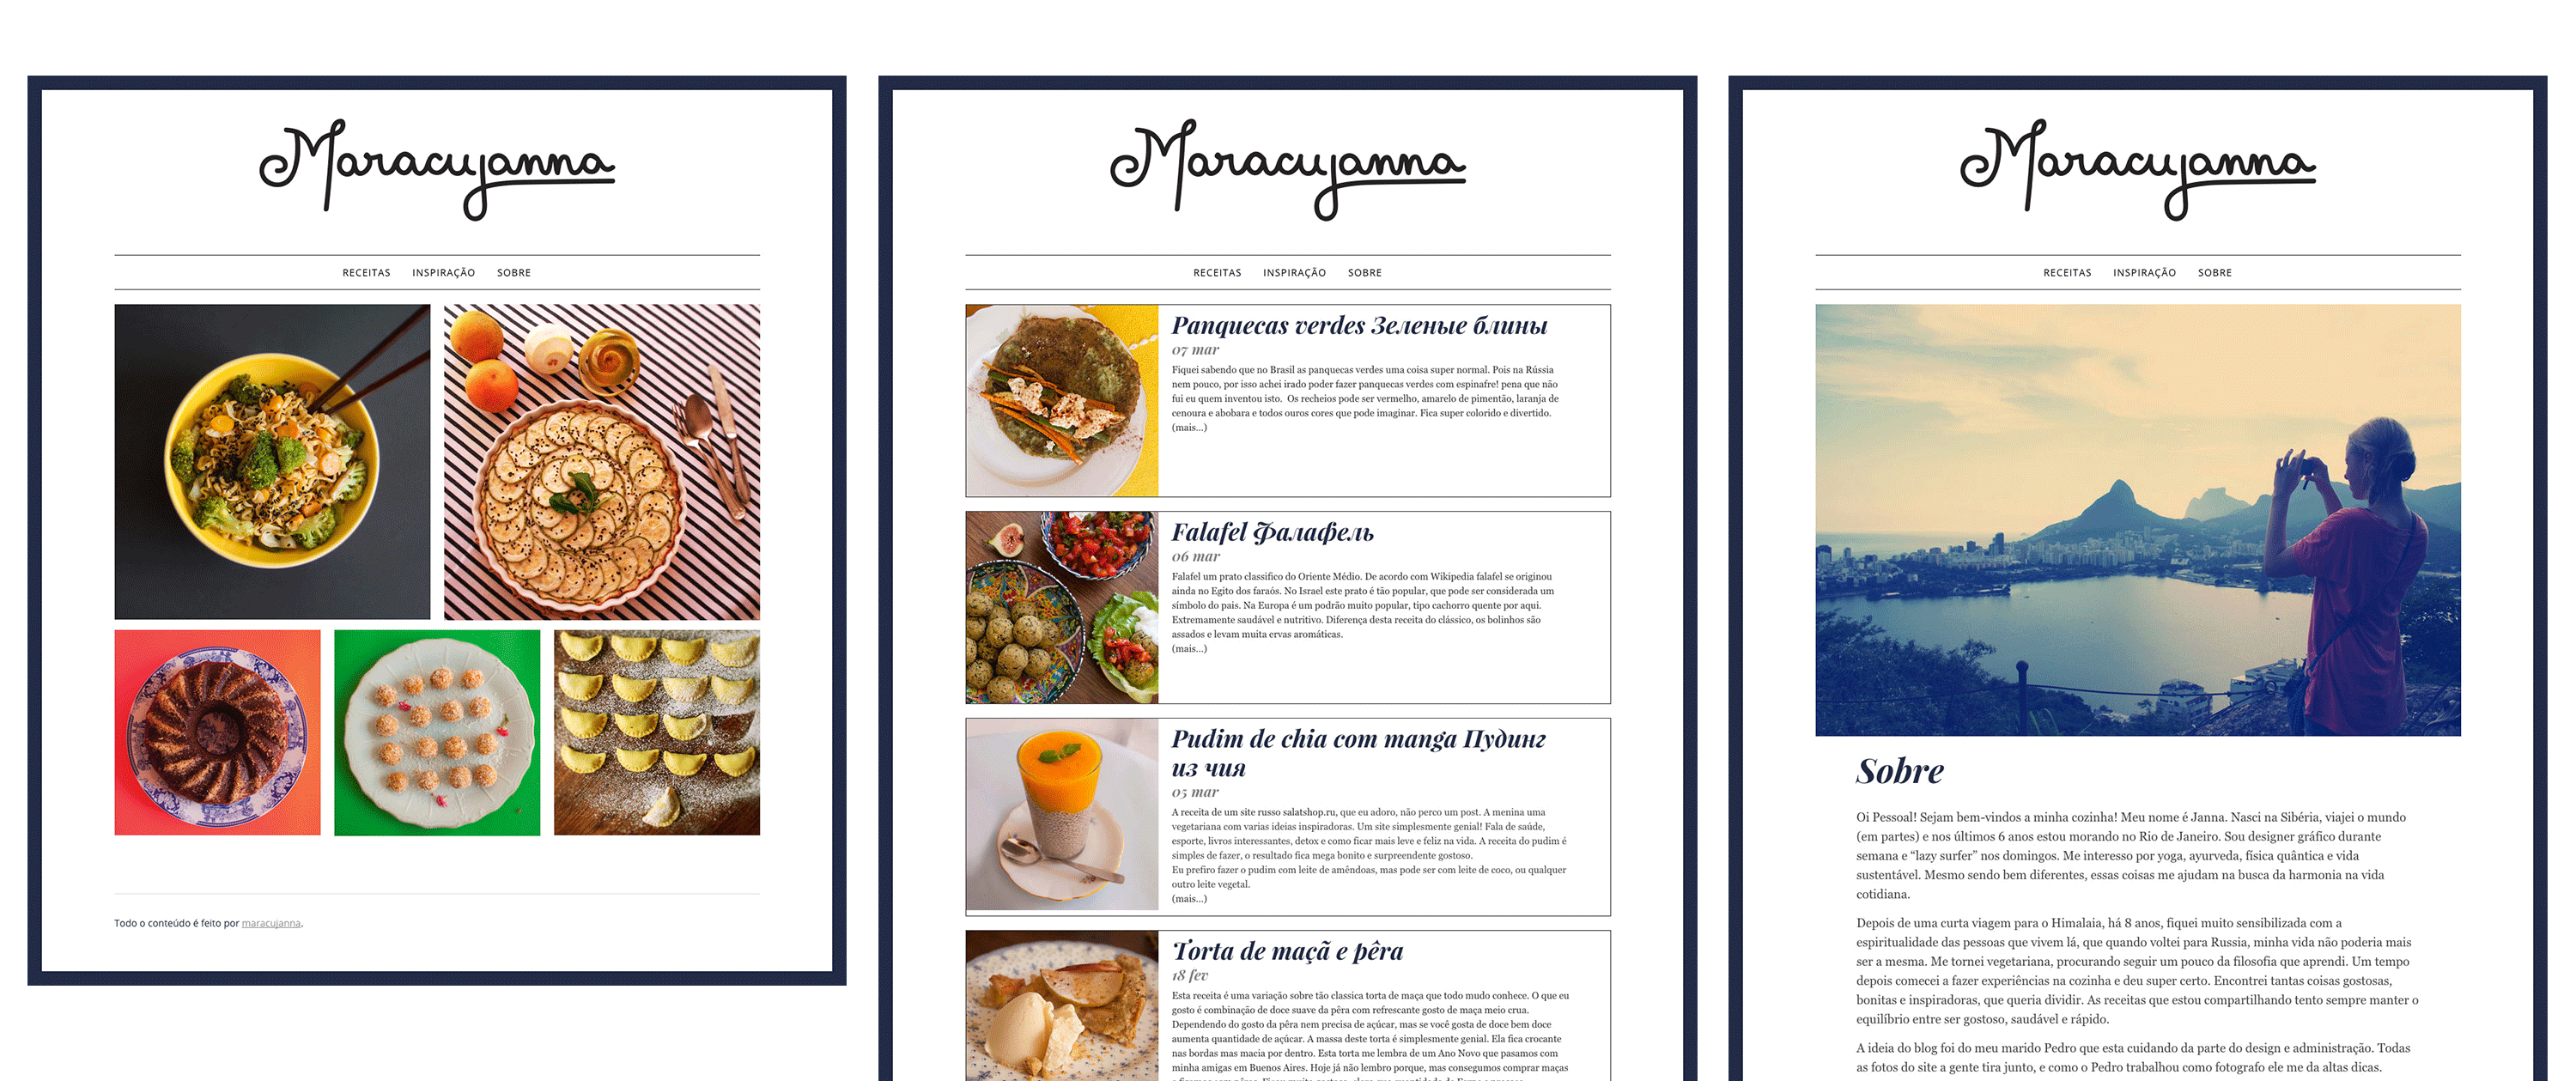 maracujanna website pages